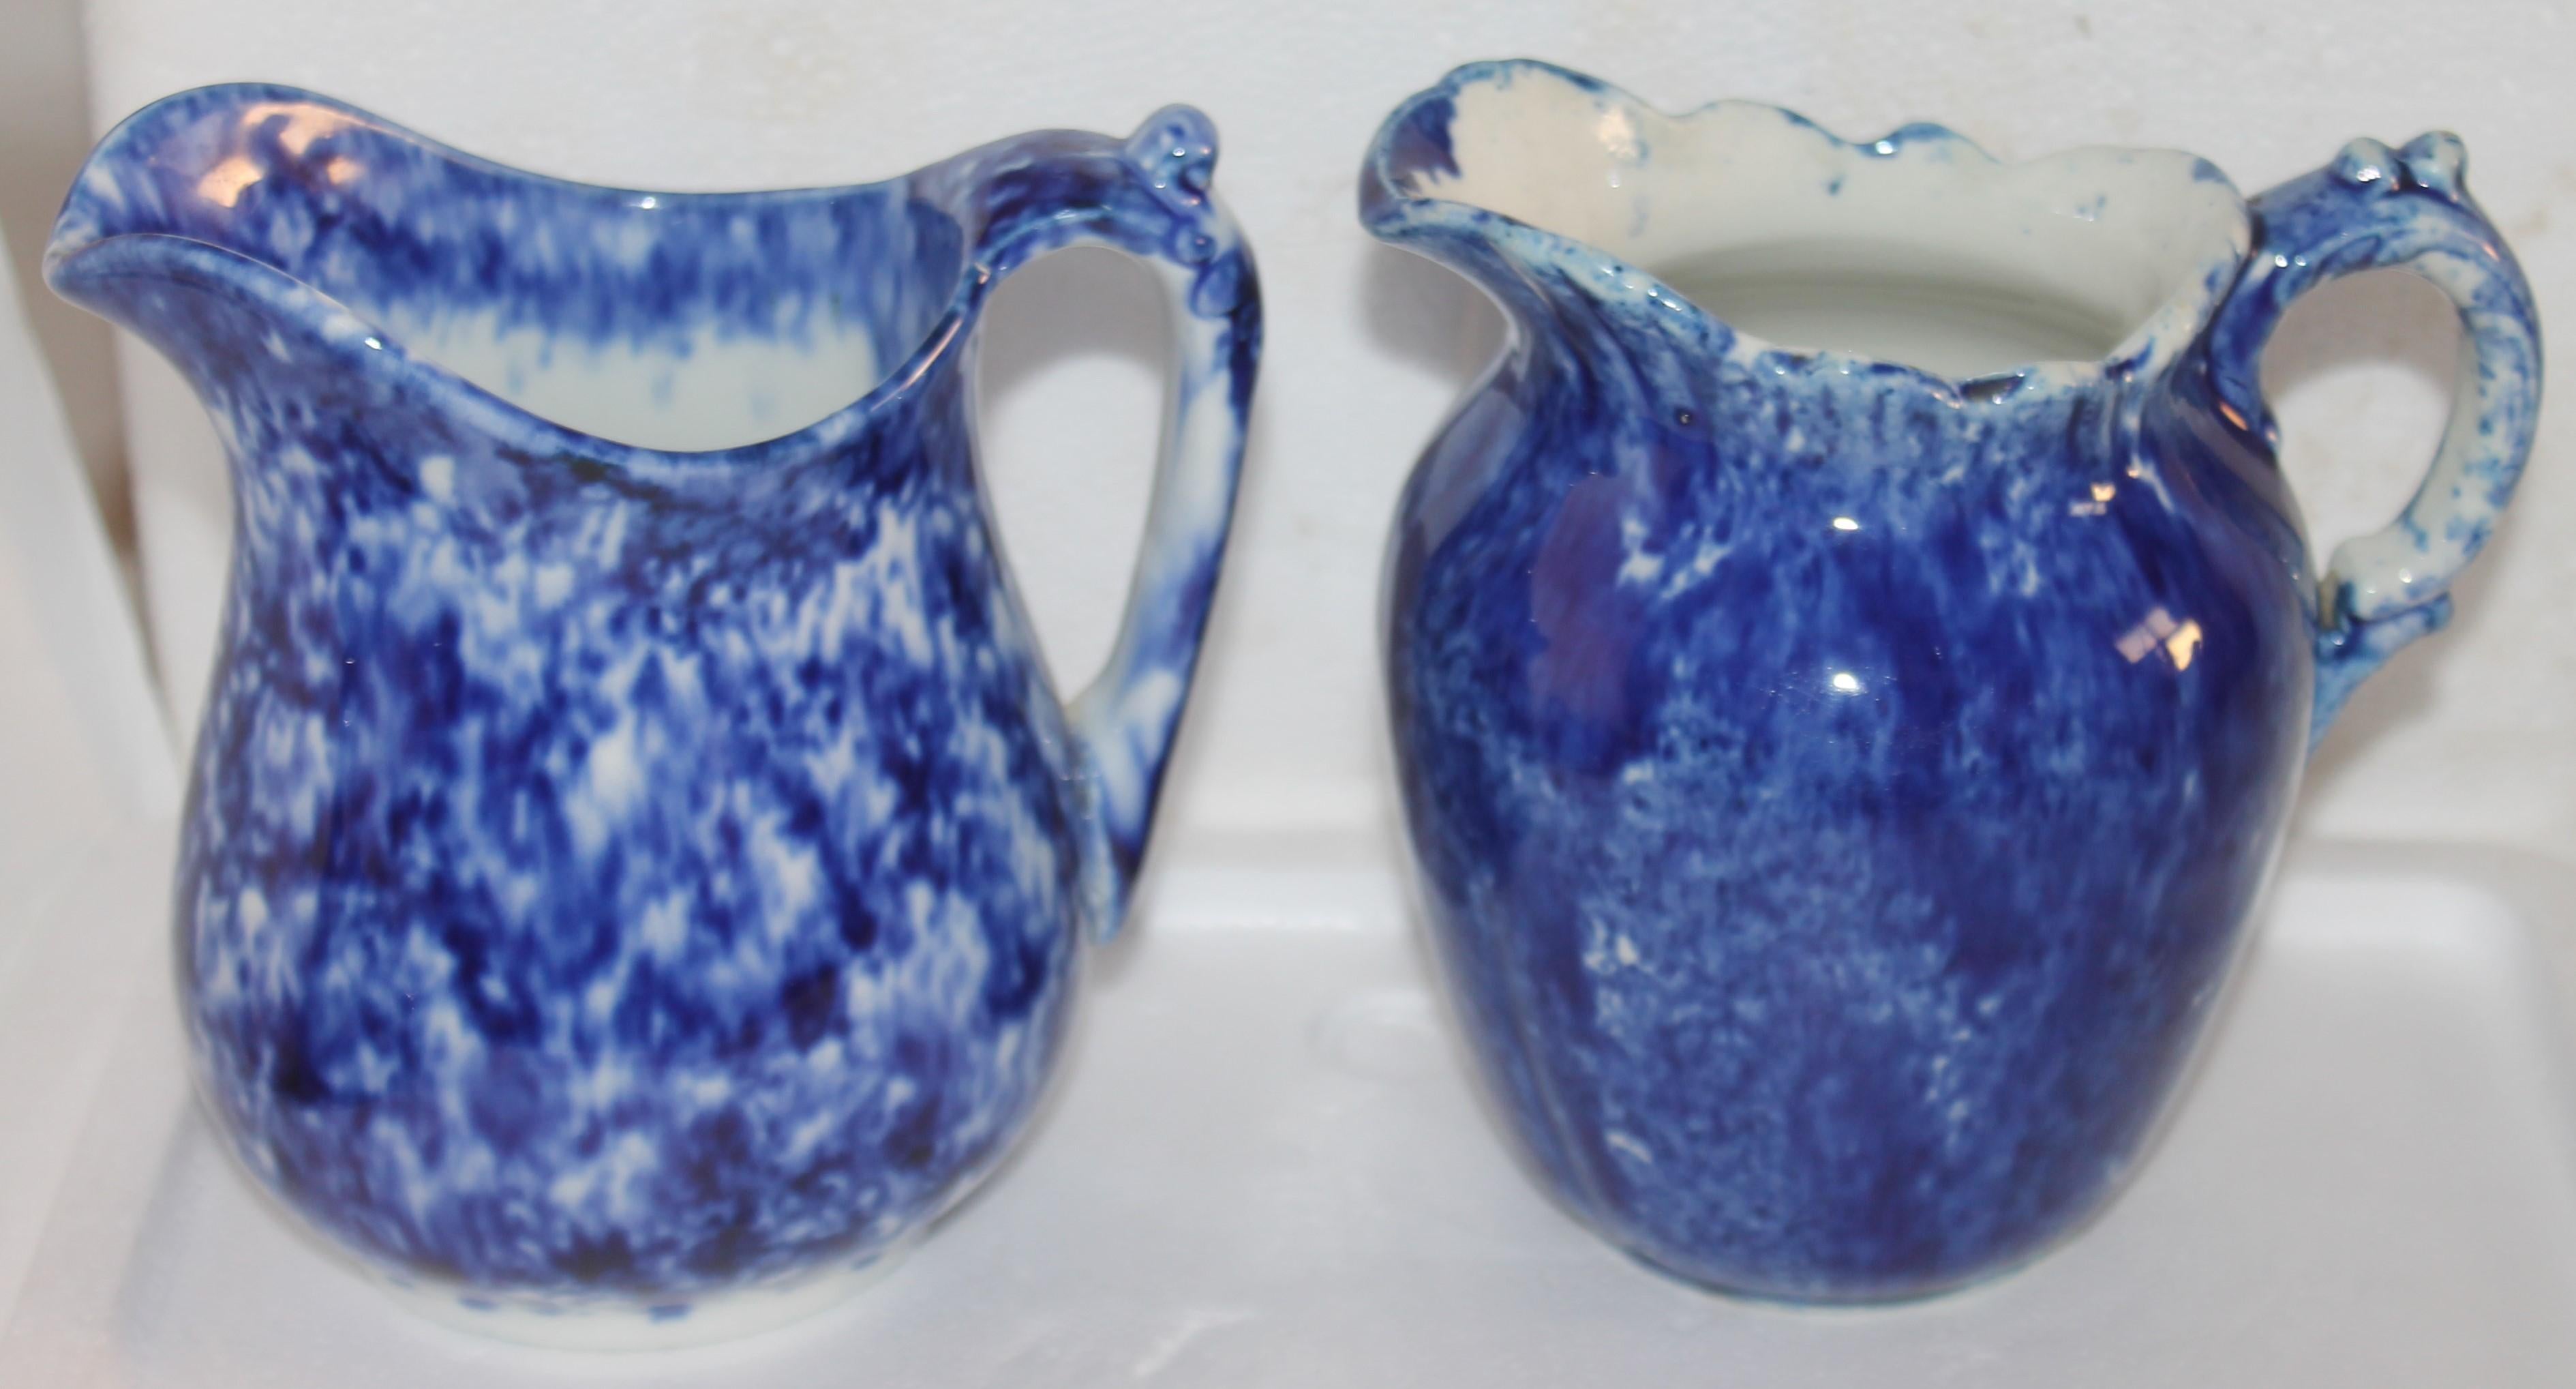 Hand-Crafted Collection of 19thc Sponge Ware Pitchers, 6 Pieces For Sale